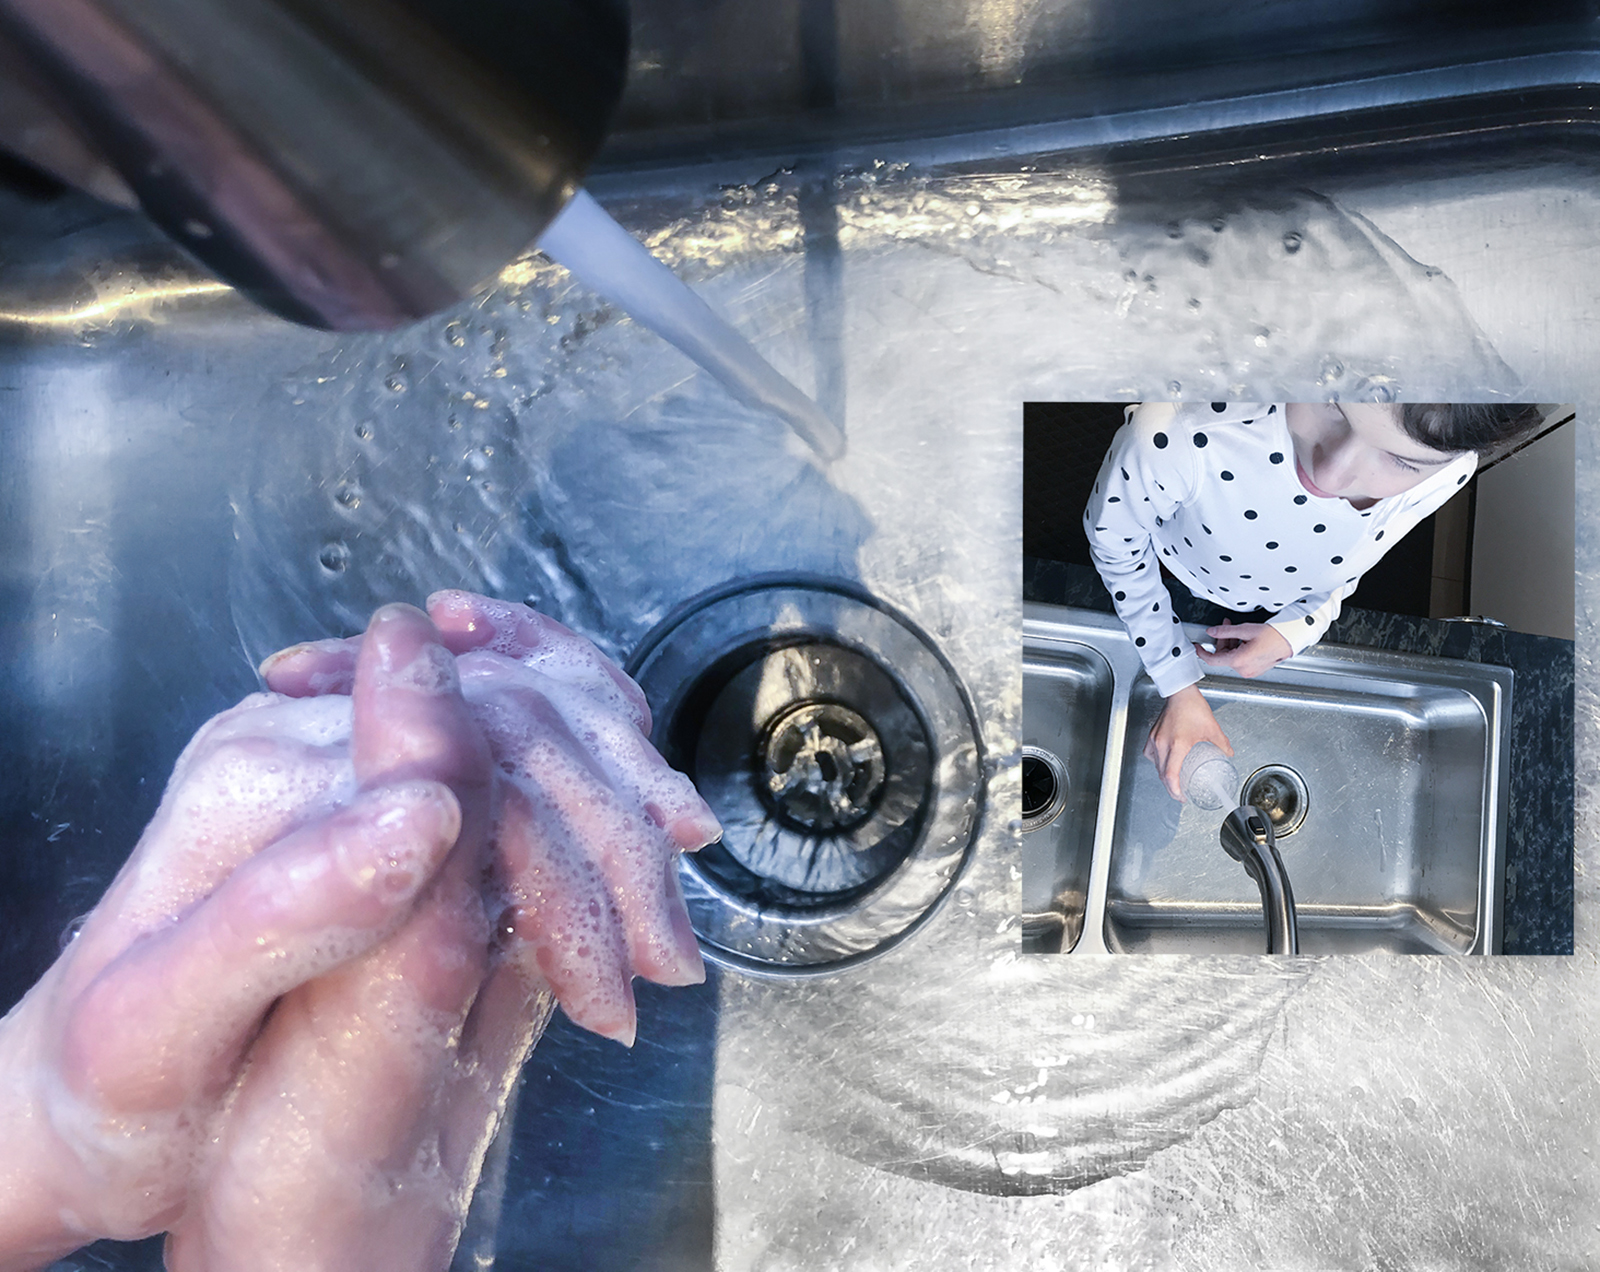 Soapy hands are rinsing off in a steel sink.